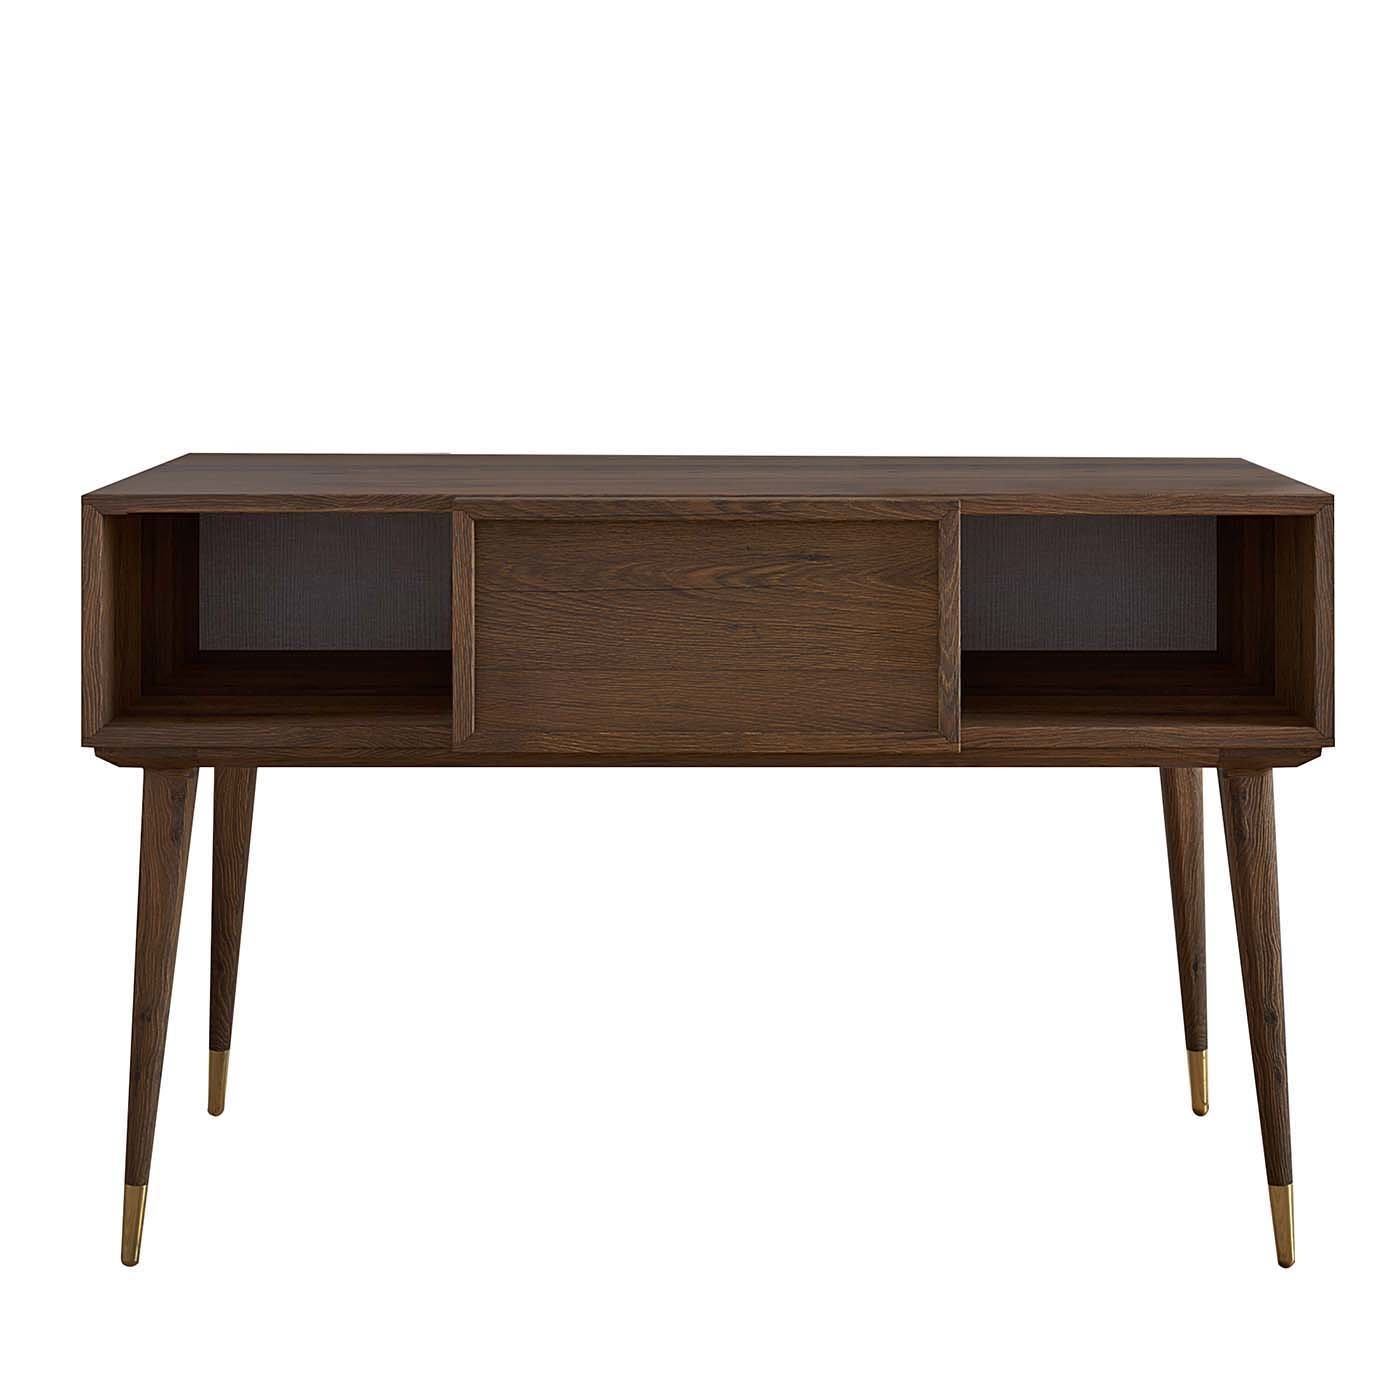 Coco Console with drawer - Callesella